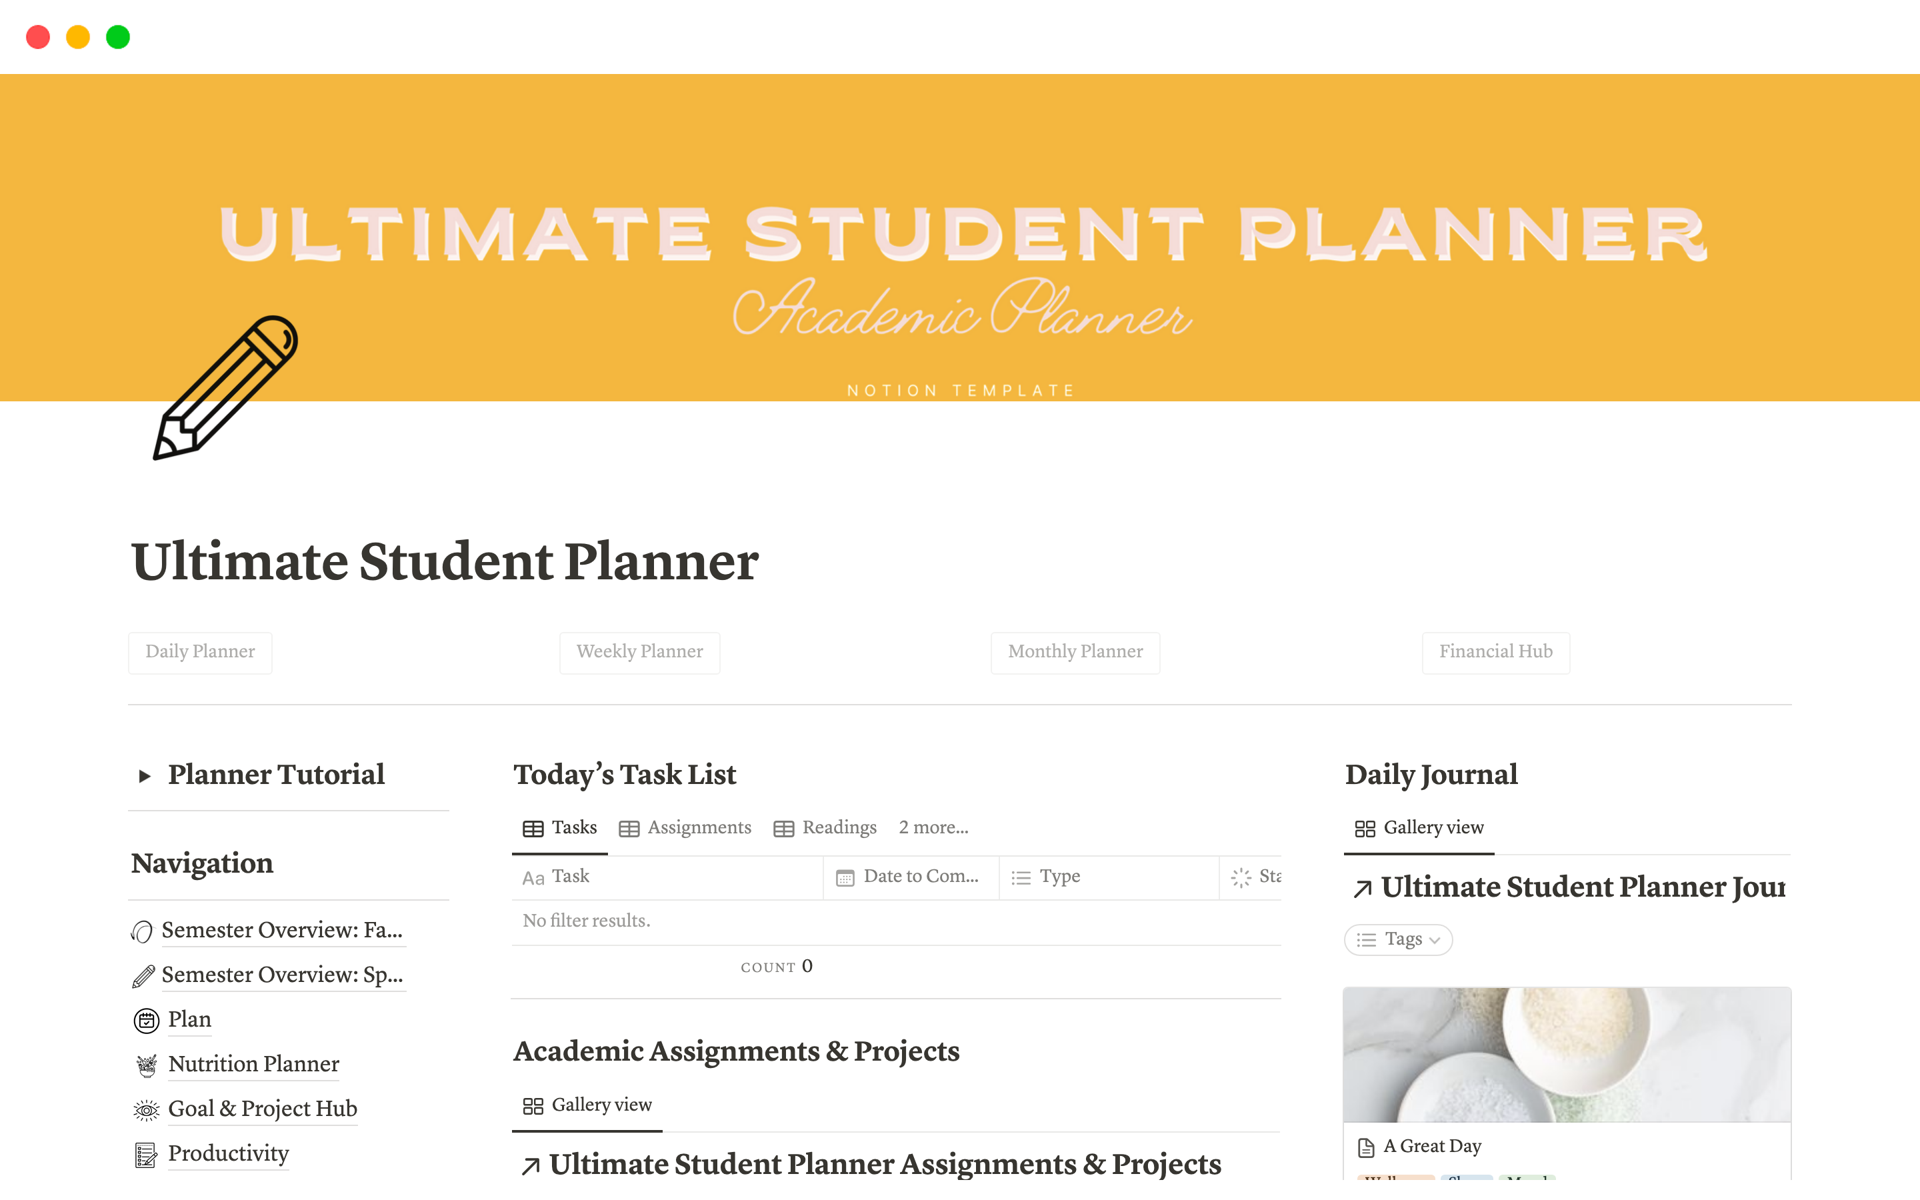 An all in one life planner for students including semester hubs, a dashboard, course pages, a wellness planner, food tracker, and more.   